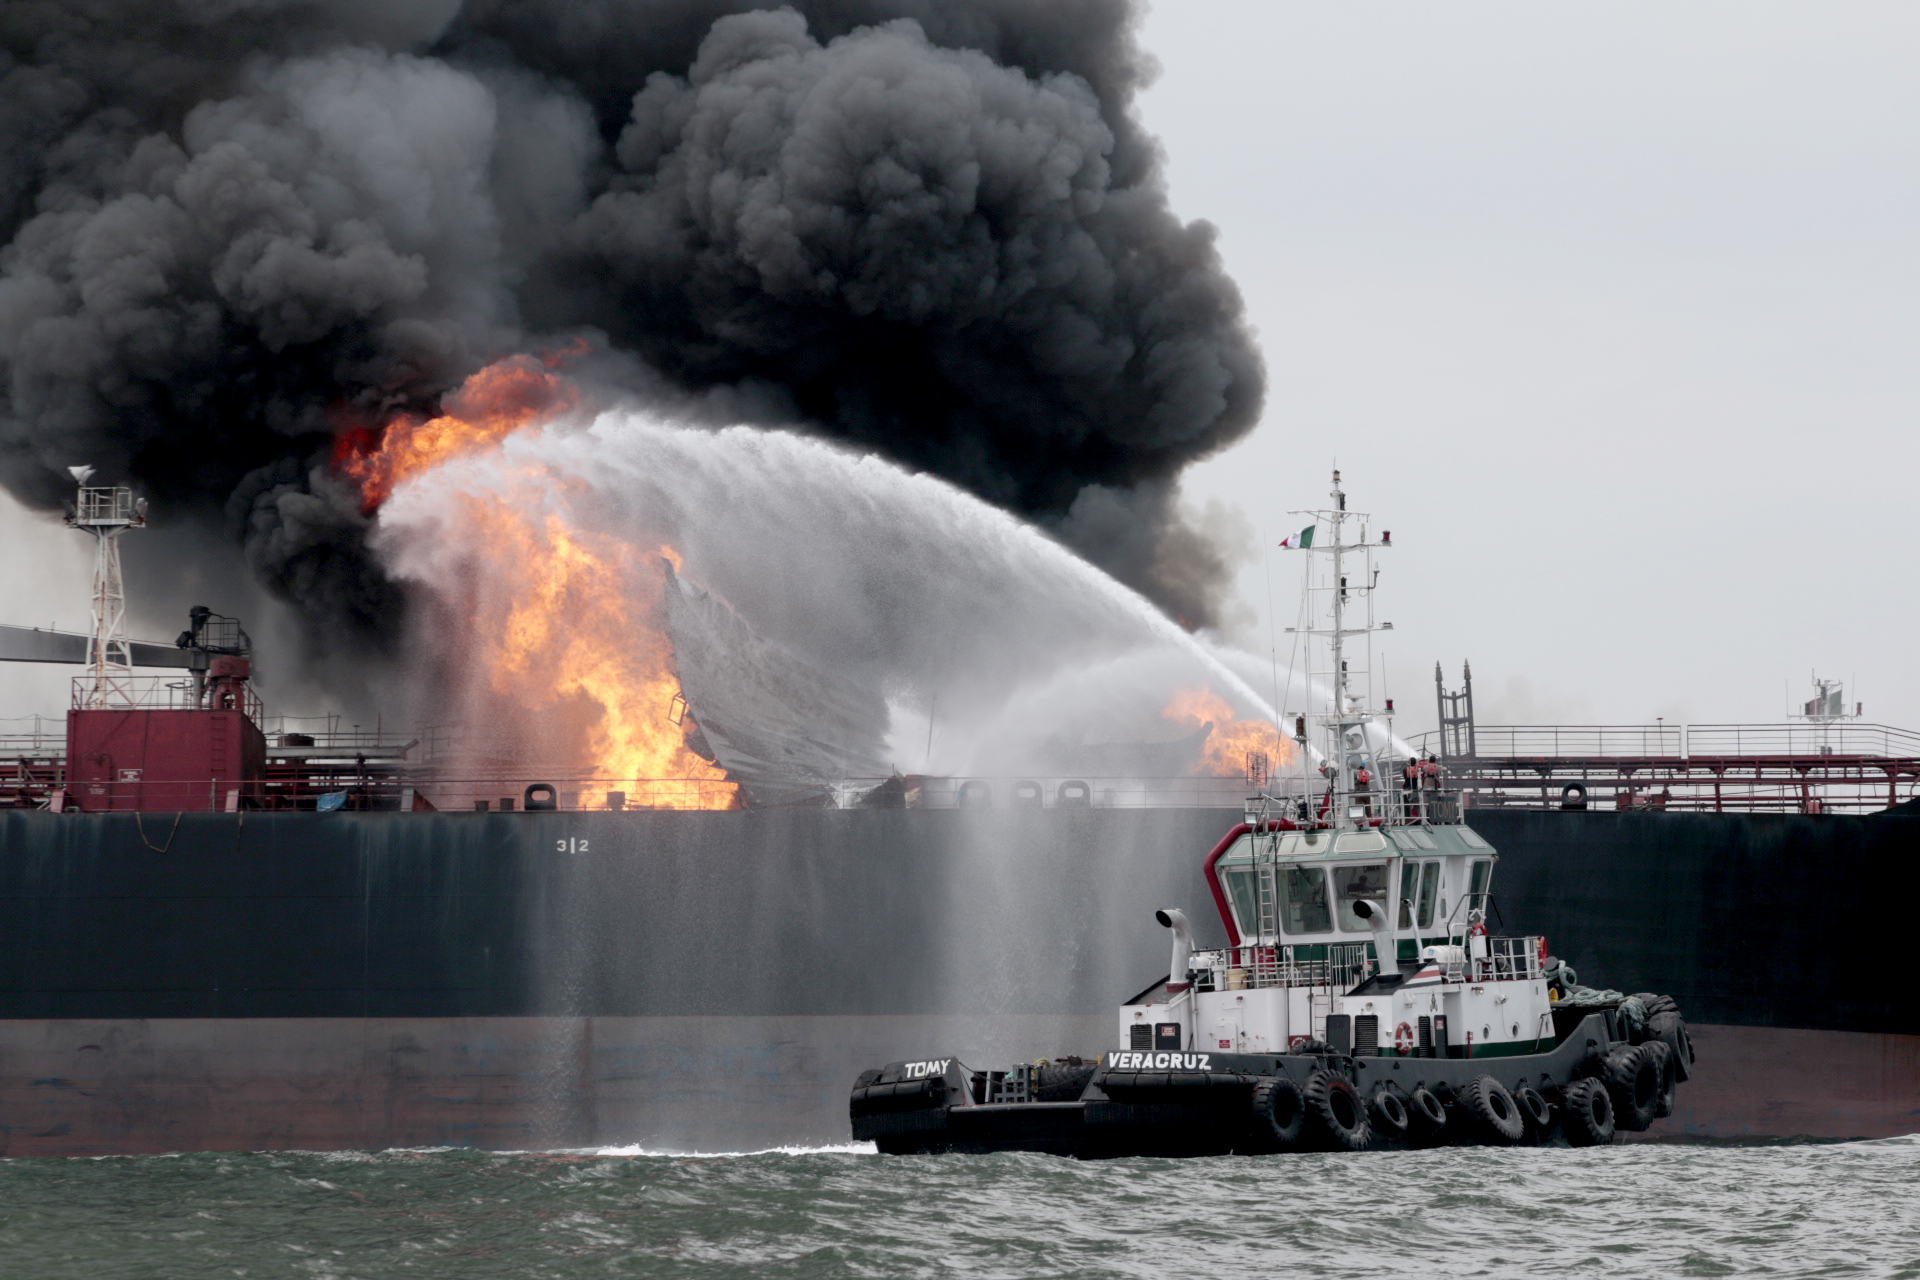 A fire broke out on a tanker belonging to the Mexican state oil company PEMEX, causing no injuries, according to a company official, in the Gulf of Mexico off the coast of Boca del Rio in Veracruz state, Mexico on September 24, 2016.  / AFP PHOTO / EDUARDO MURILLO